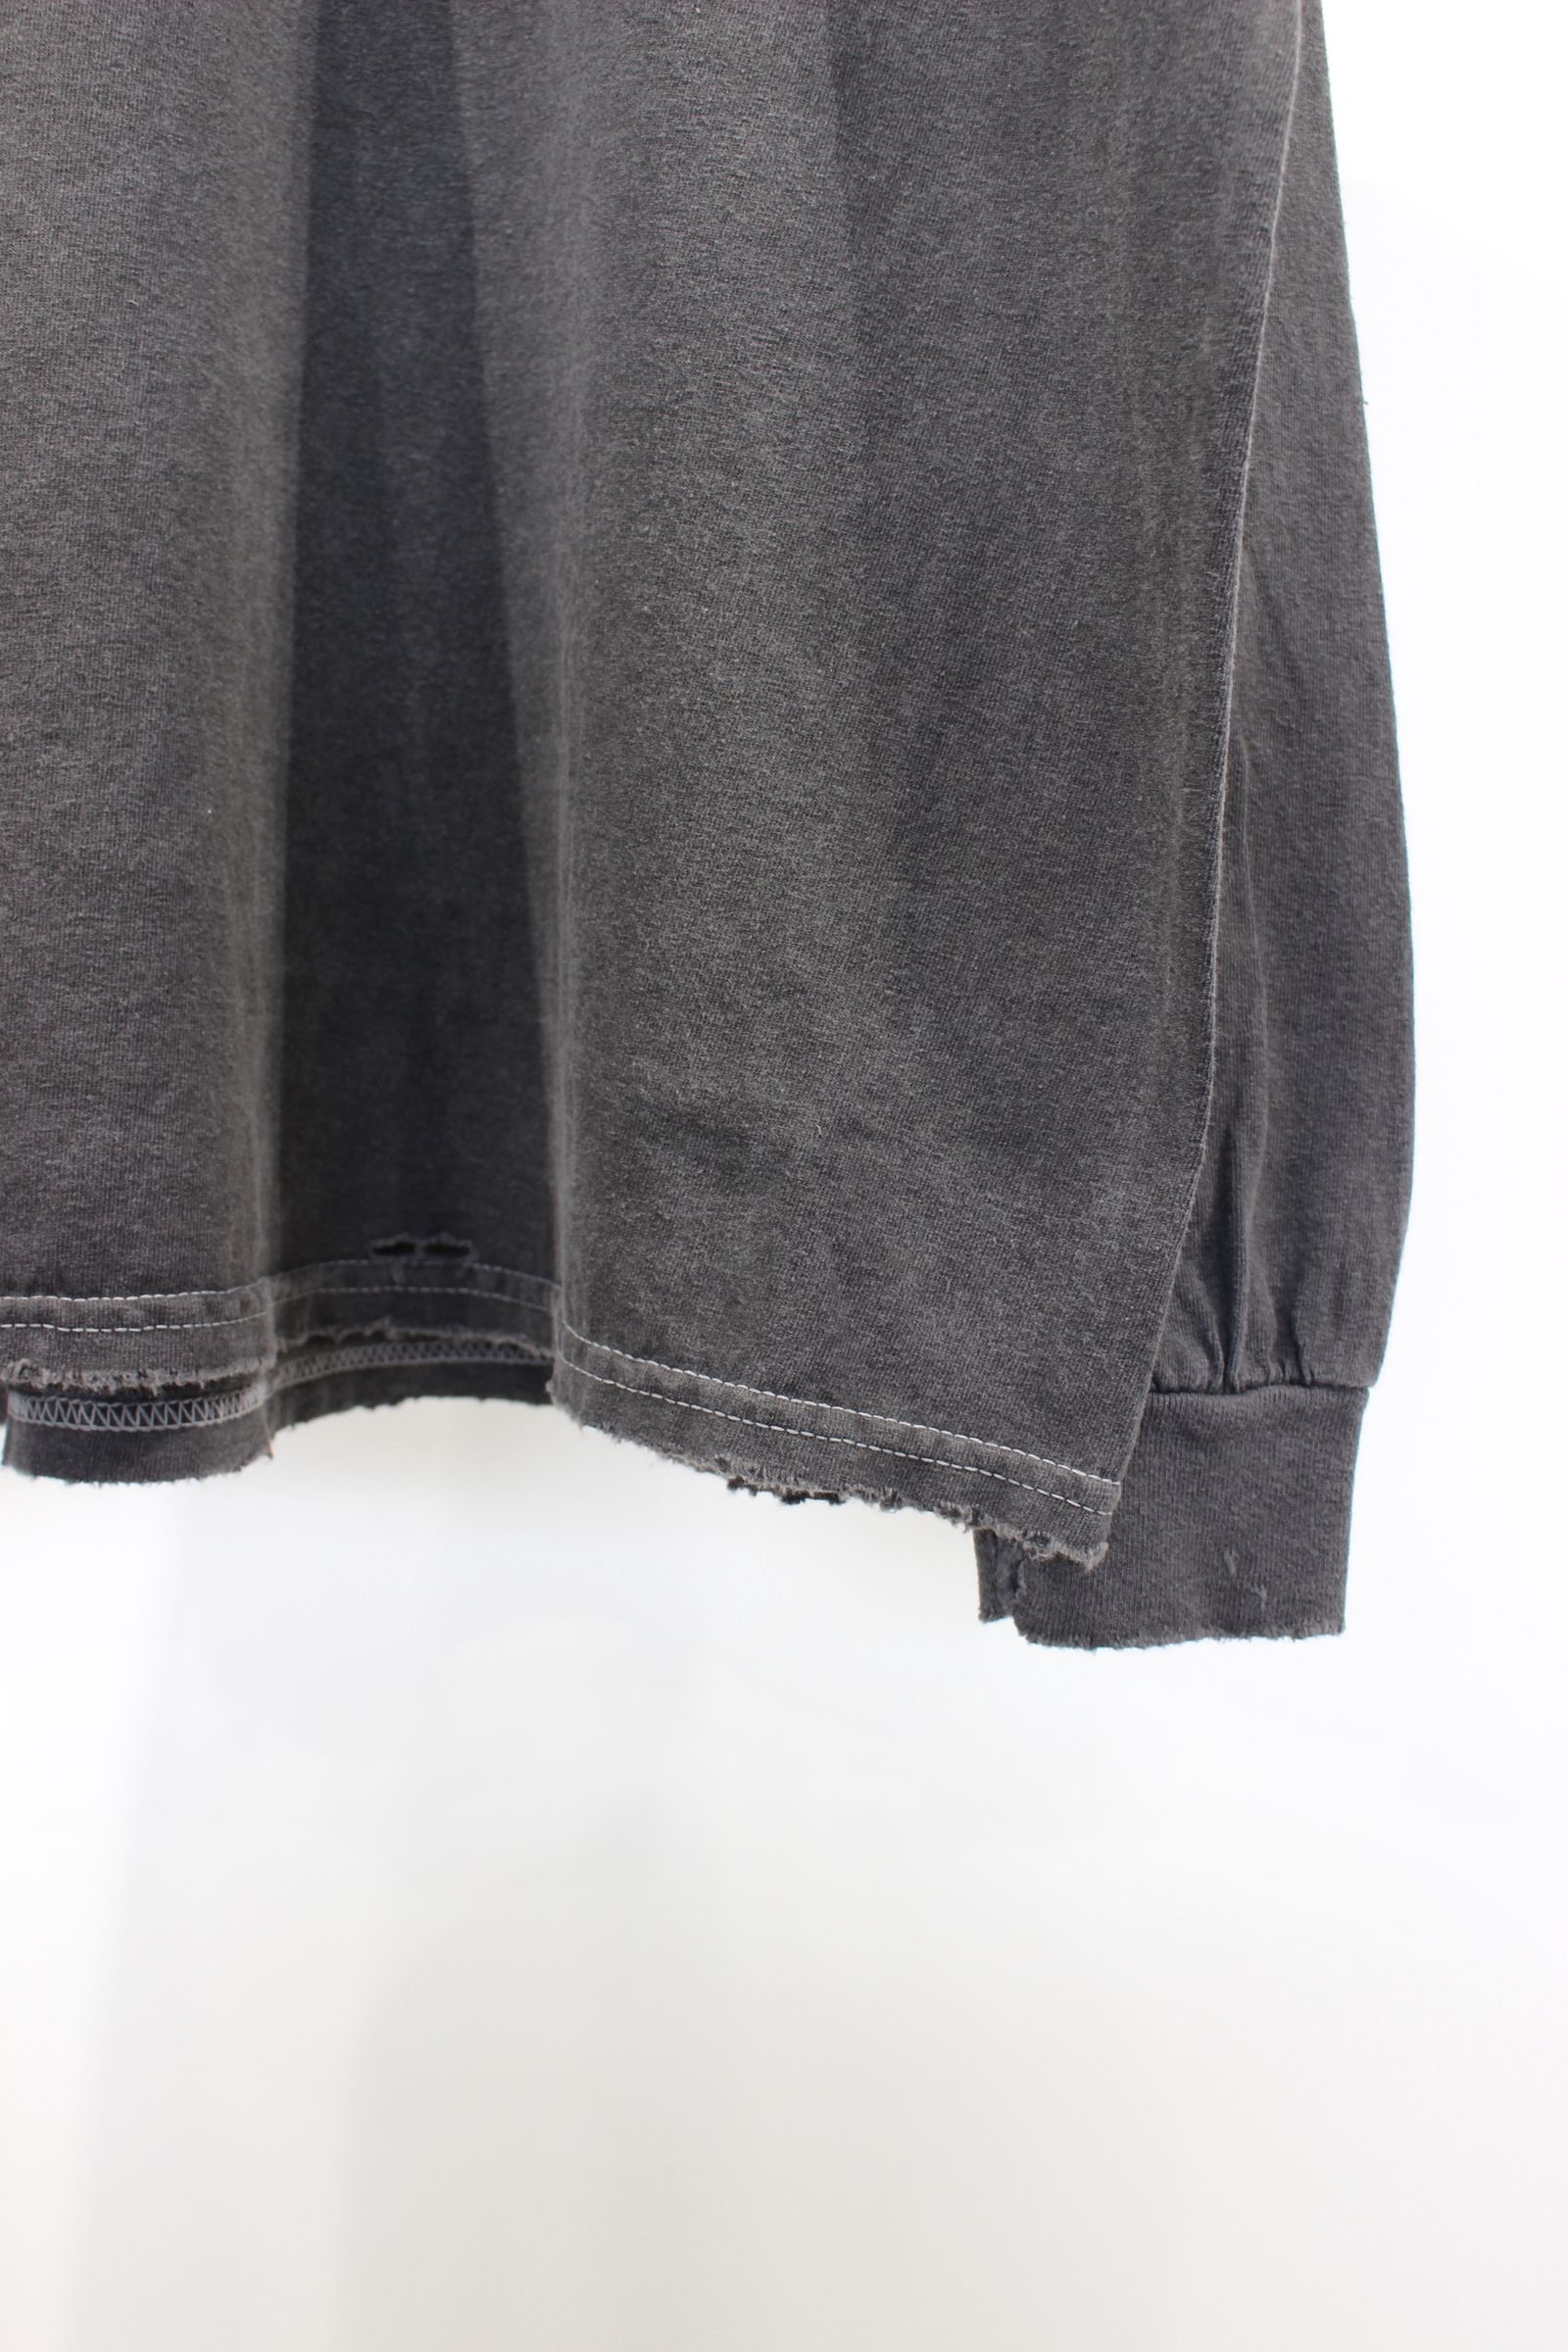 ANCELLM - EMBROIDERY DYED LS T-SHIRT/BLACK | NapsNote